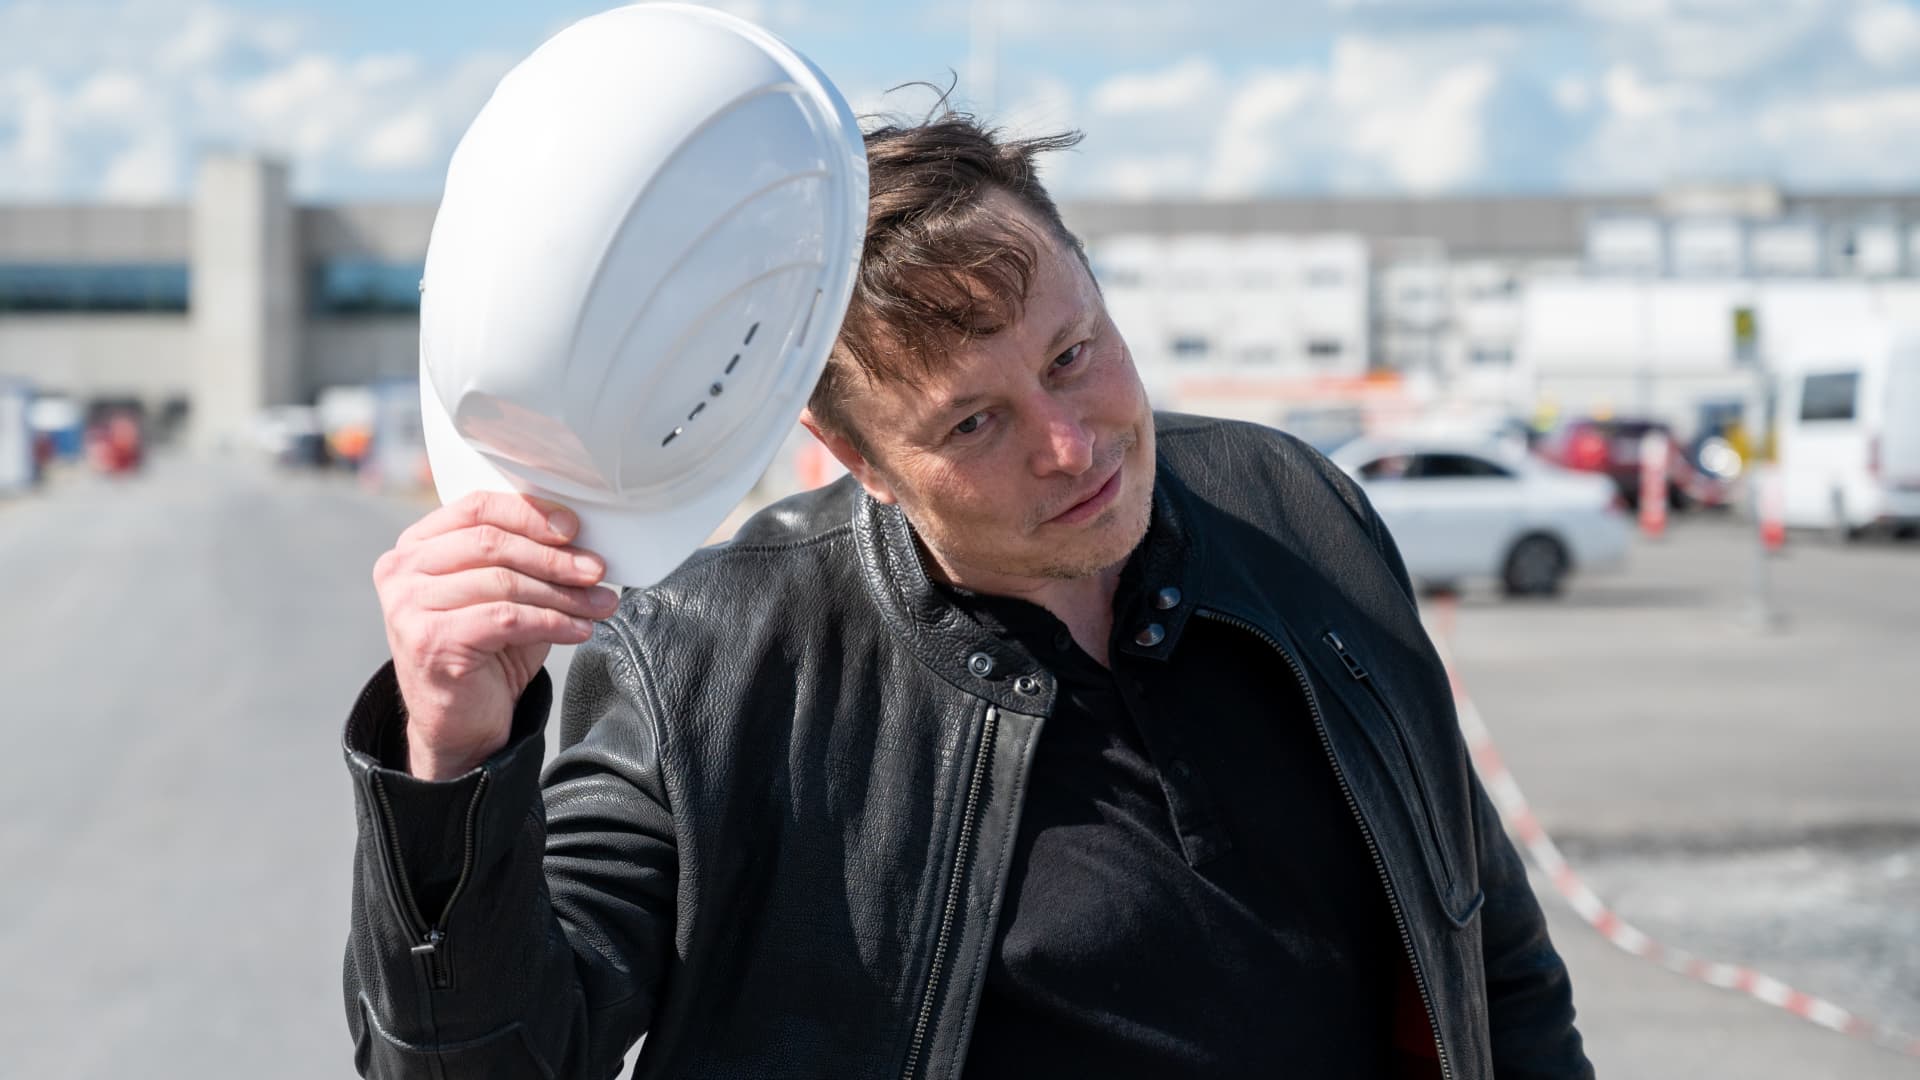 Elon Musk has expanded a number of his companies within Texas, including Tesla, SpaceX, the Boring Co. and Neuralink. Tesla broke ground on a lithium refinery in Texas earlier this year with Governor Greg Abbott in attendance.